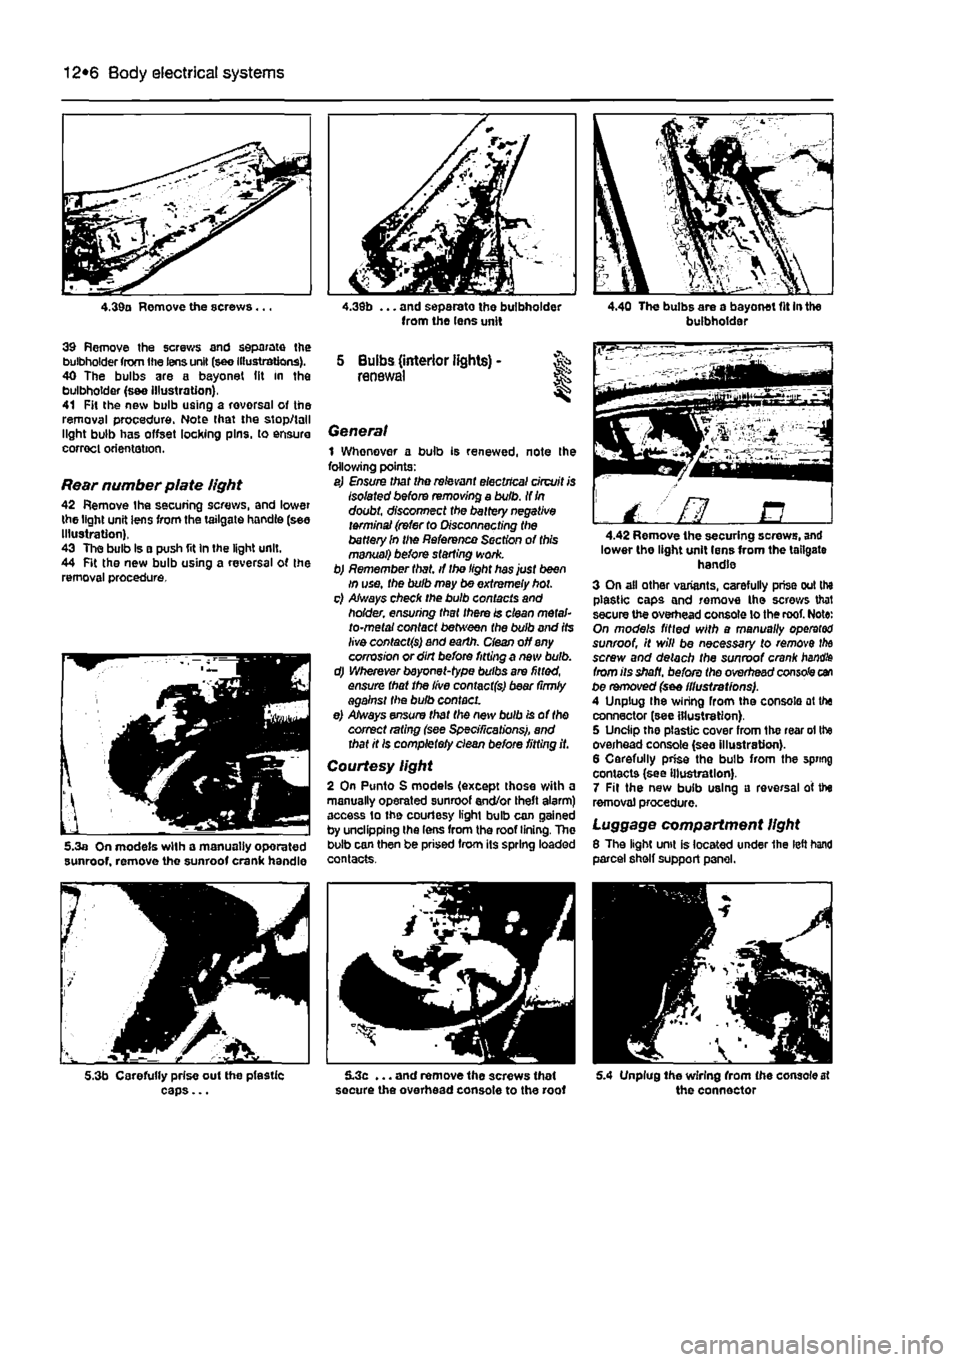 FIAT PUNTO 1996 176 / 1.G Workshop Manual 
12*6 Body electrical systems 
4.39a Remove the screws... 
39 Remove the screws and separate the bulbholder from the lens unit (see Illustrations). 40 The bulbs are a bayonet (it in the bulbholder (s&